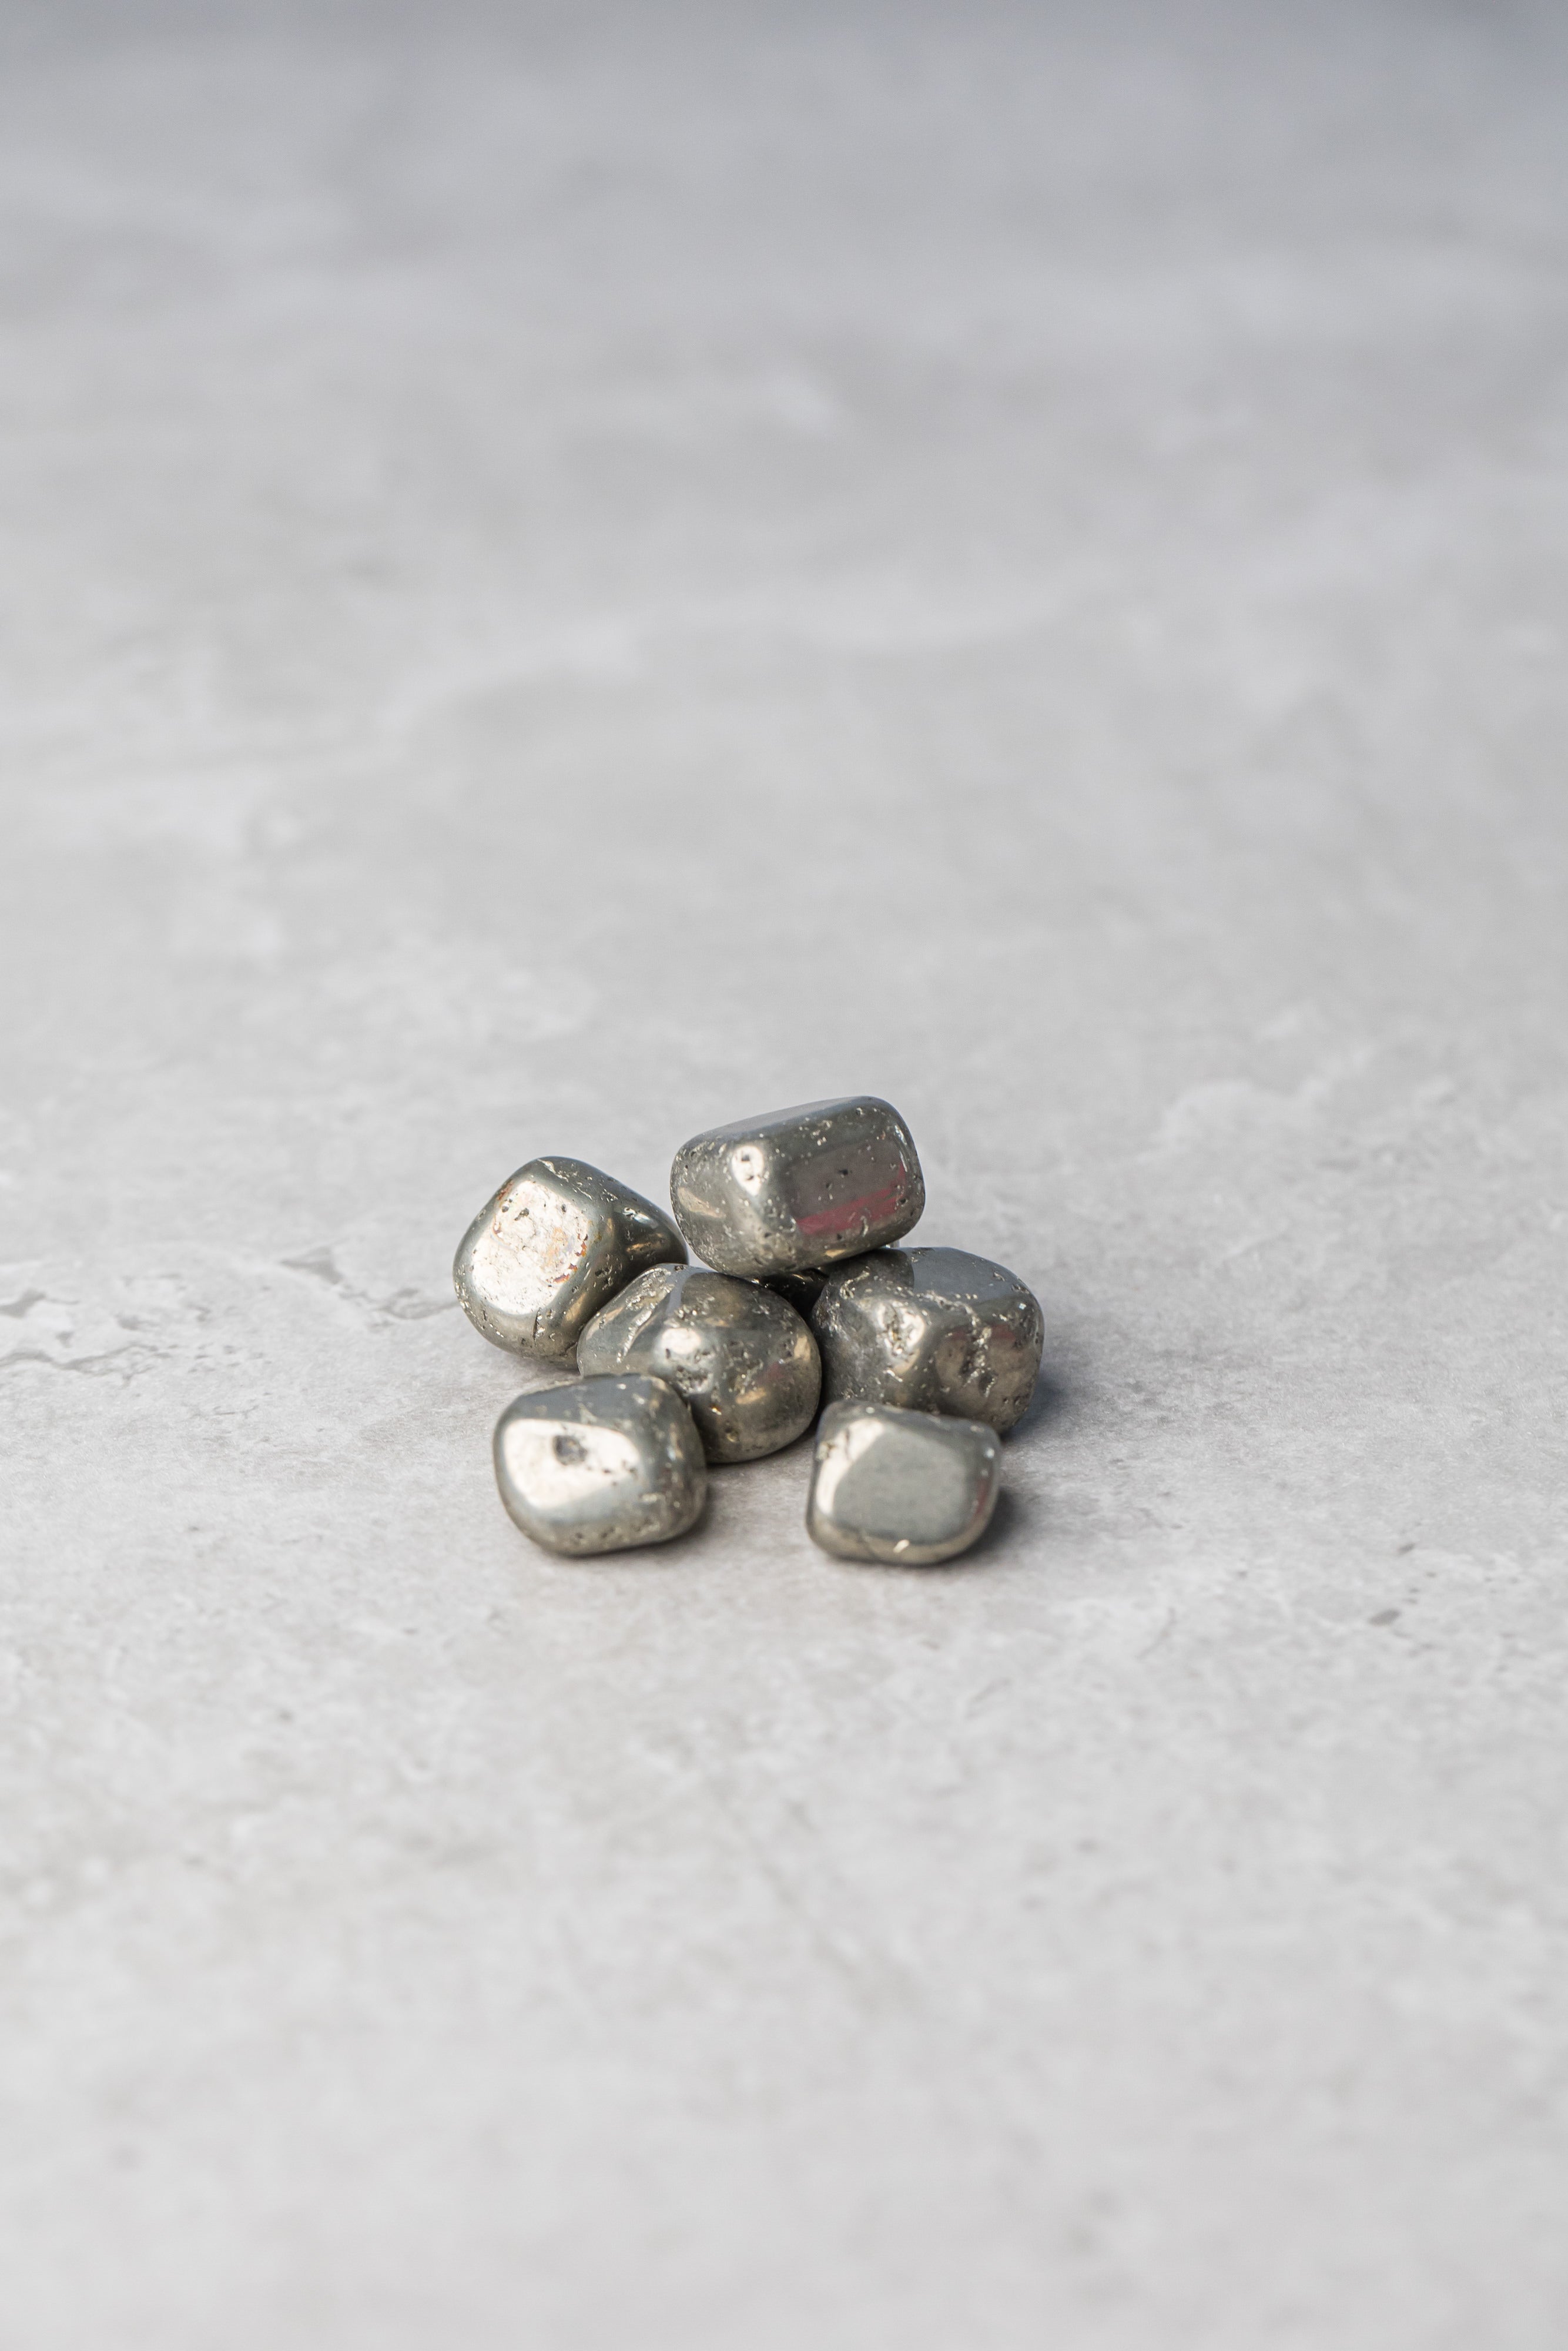 Pyrite - Sparkling Stone for Prosperity and Confidence - Everyday Rocks